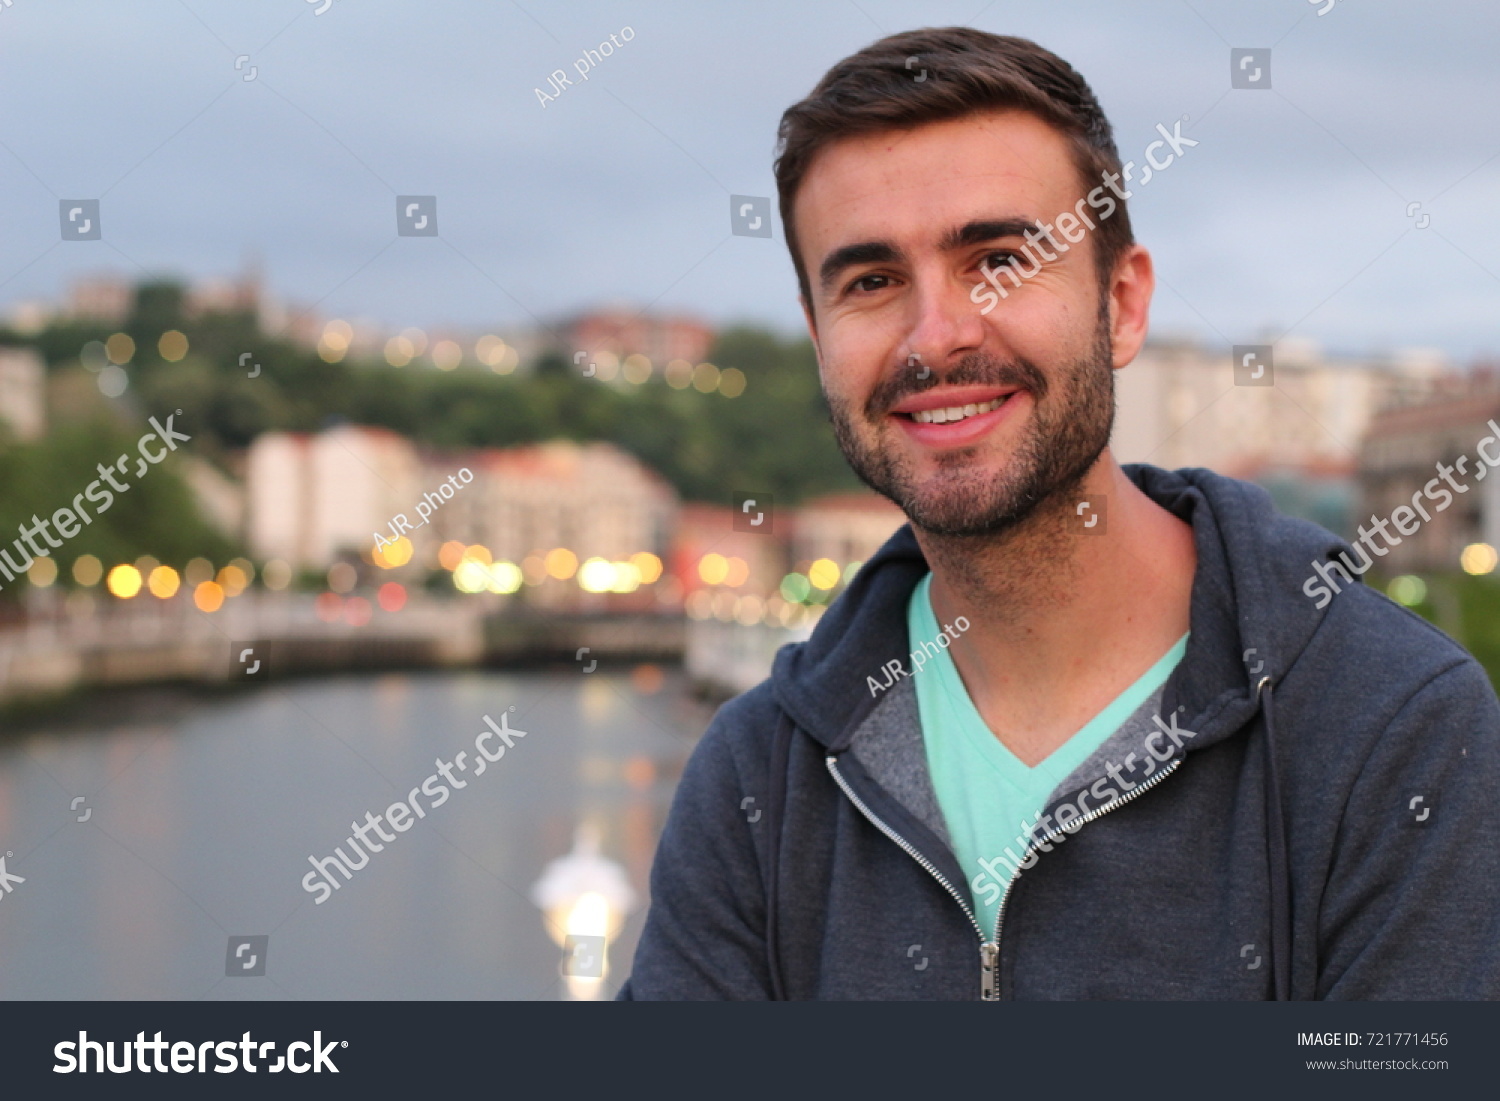 2-819-face-of-30-years-old-man-images-stock-photos-vectors